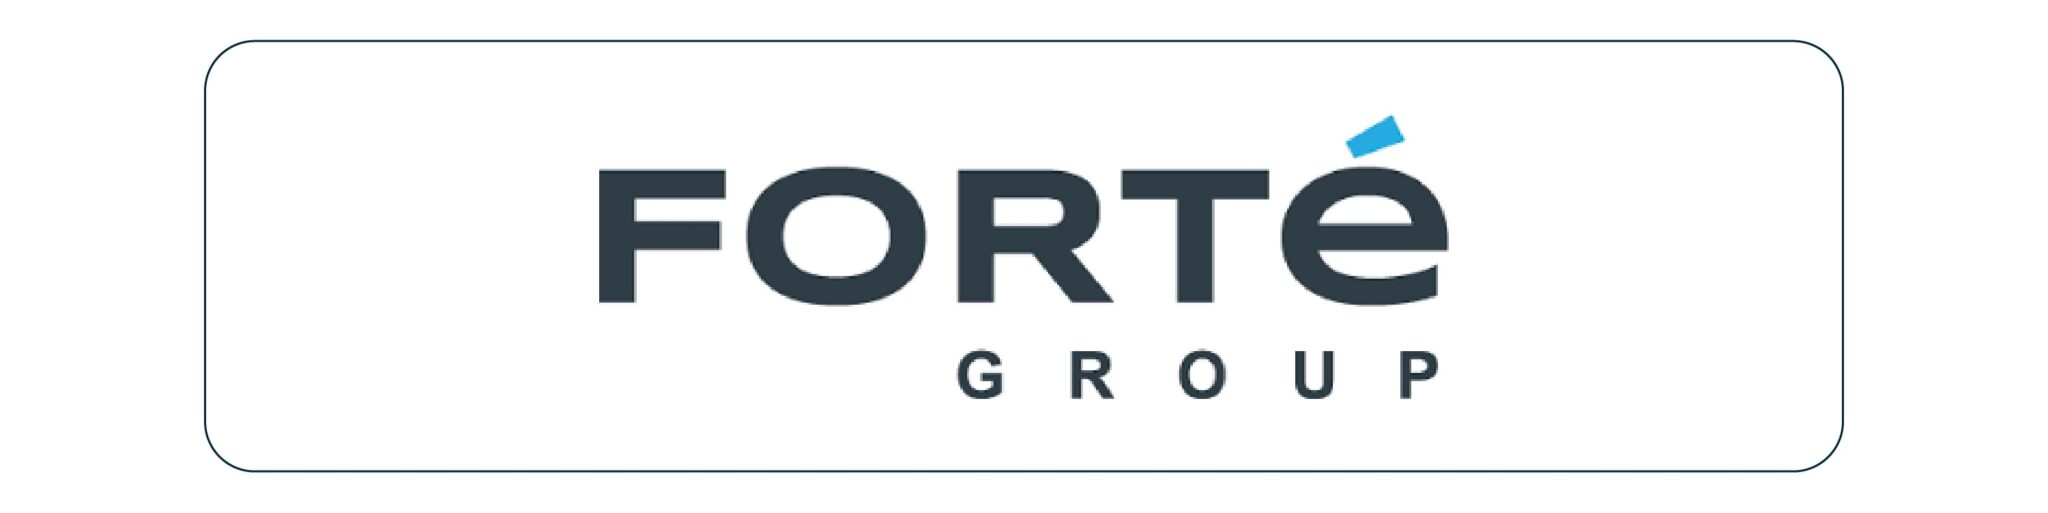 Forte Group is the best SaaS development company on the US market